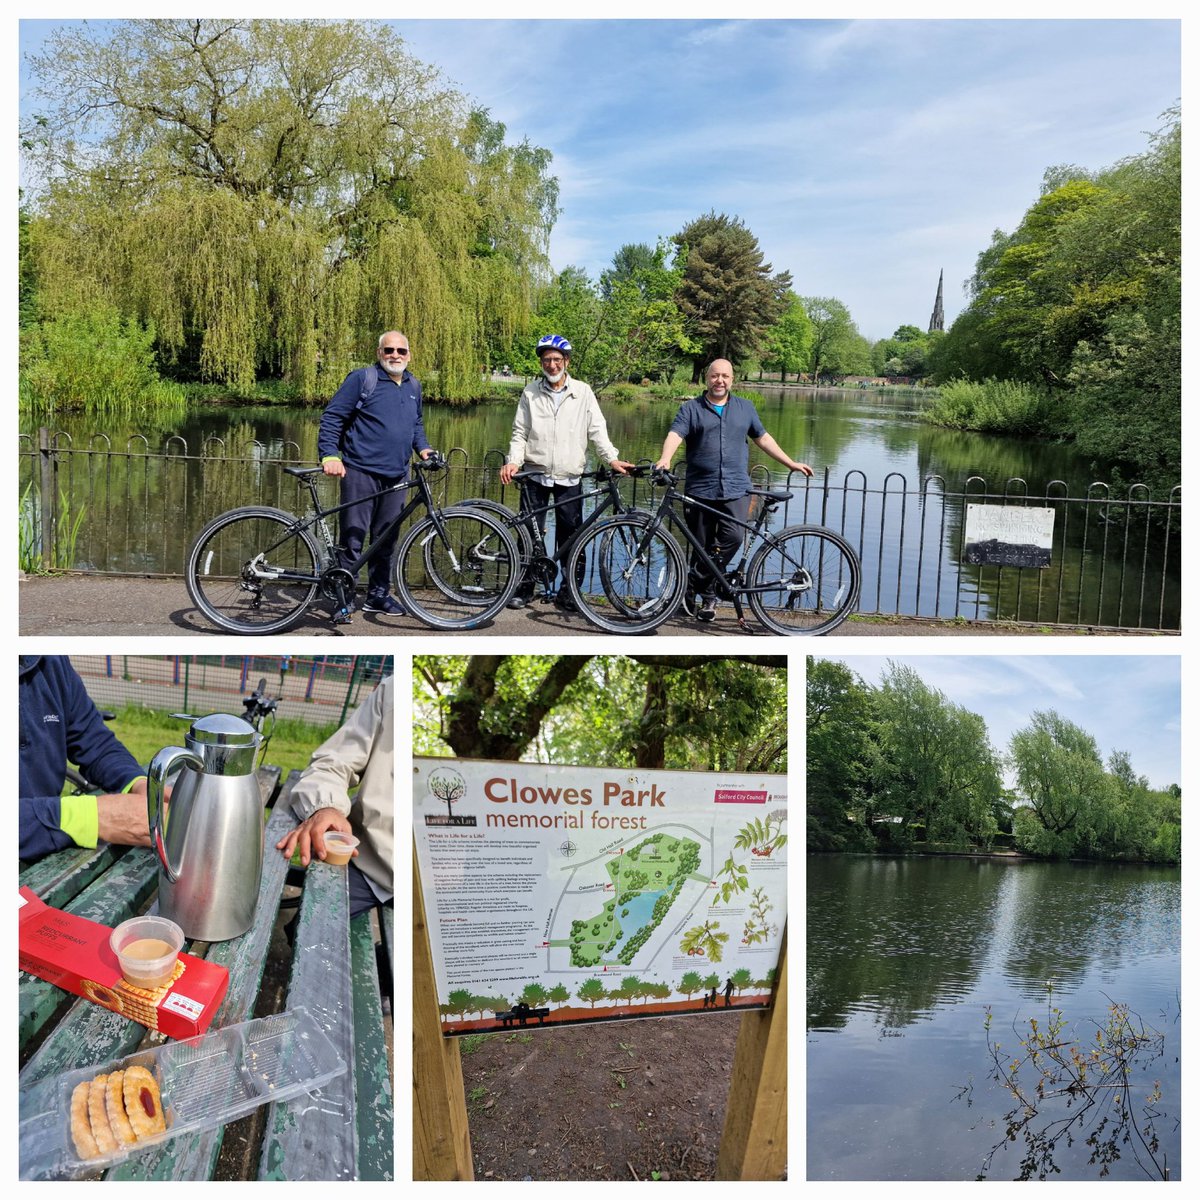 The Cycling club enjoyed a good ride over the weekend, they visited all the local parks in the vicinity. Also enjoyed a well deserved break with tea and biscuits in the beautiful weather. Please do join us on future rides @WeAreCyclingUK #mentalhealthawareness @OfficialTfGM